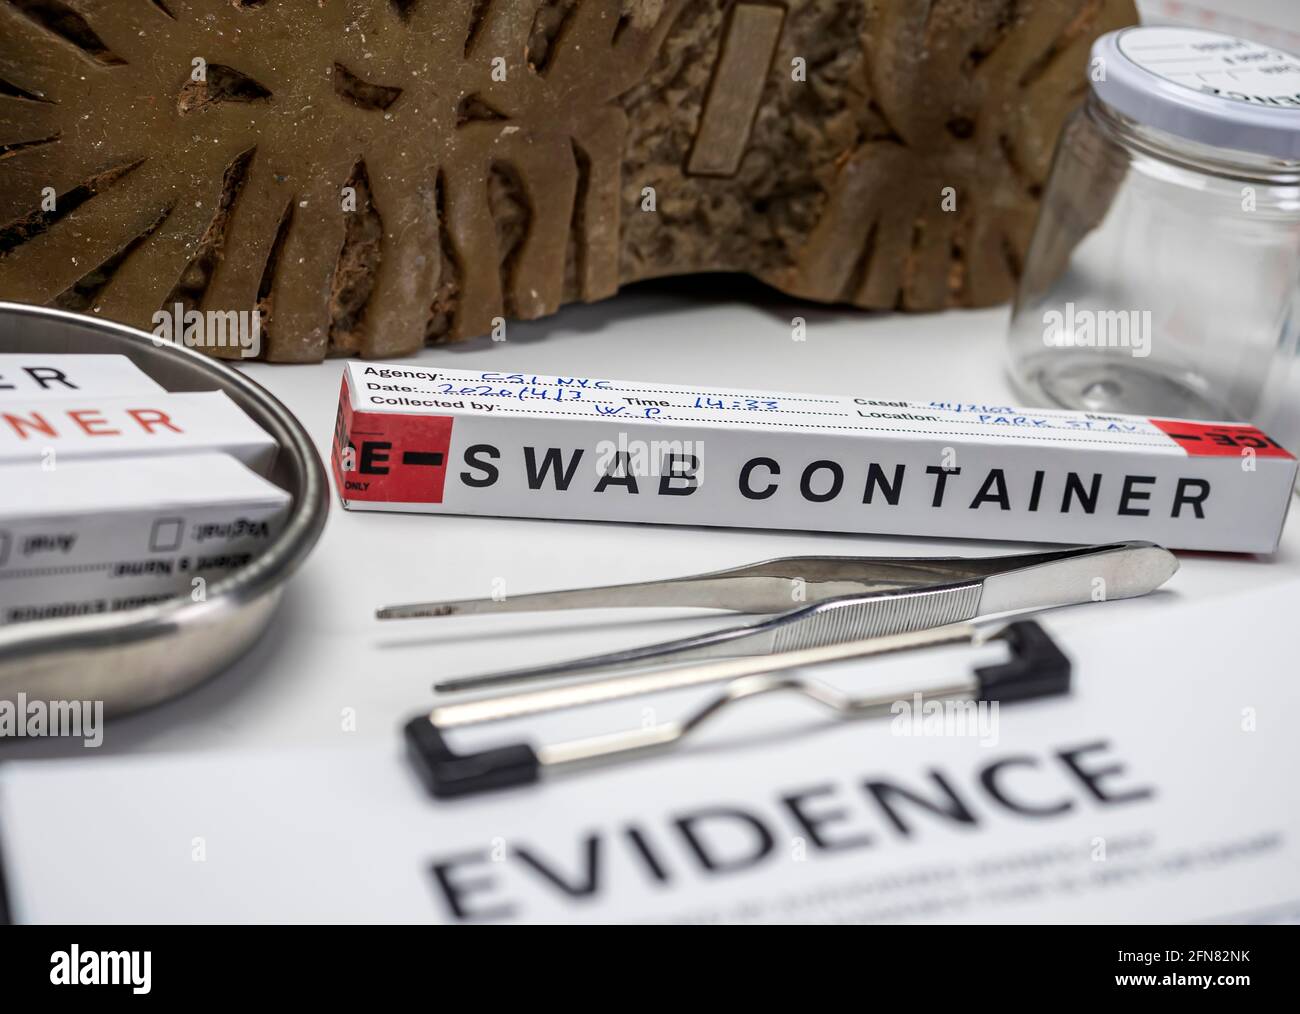 Shoe particle trace samples in crime lab, homicide investigation, concept image Stock Photo